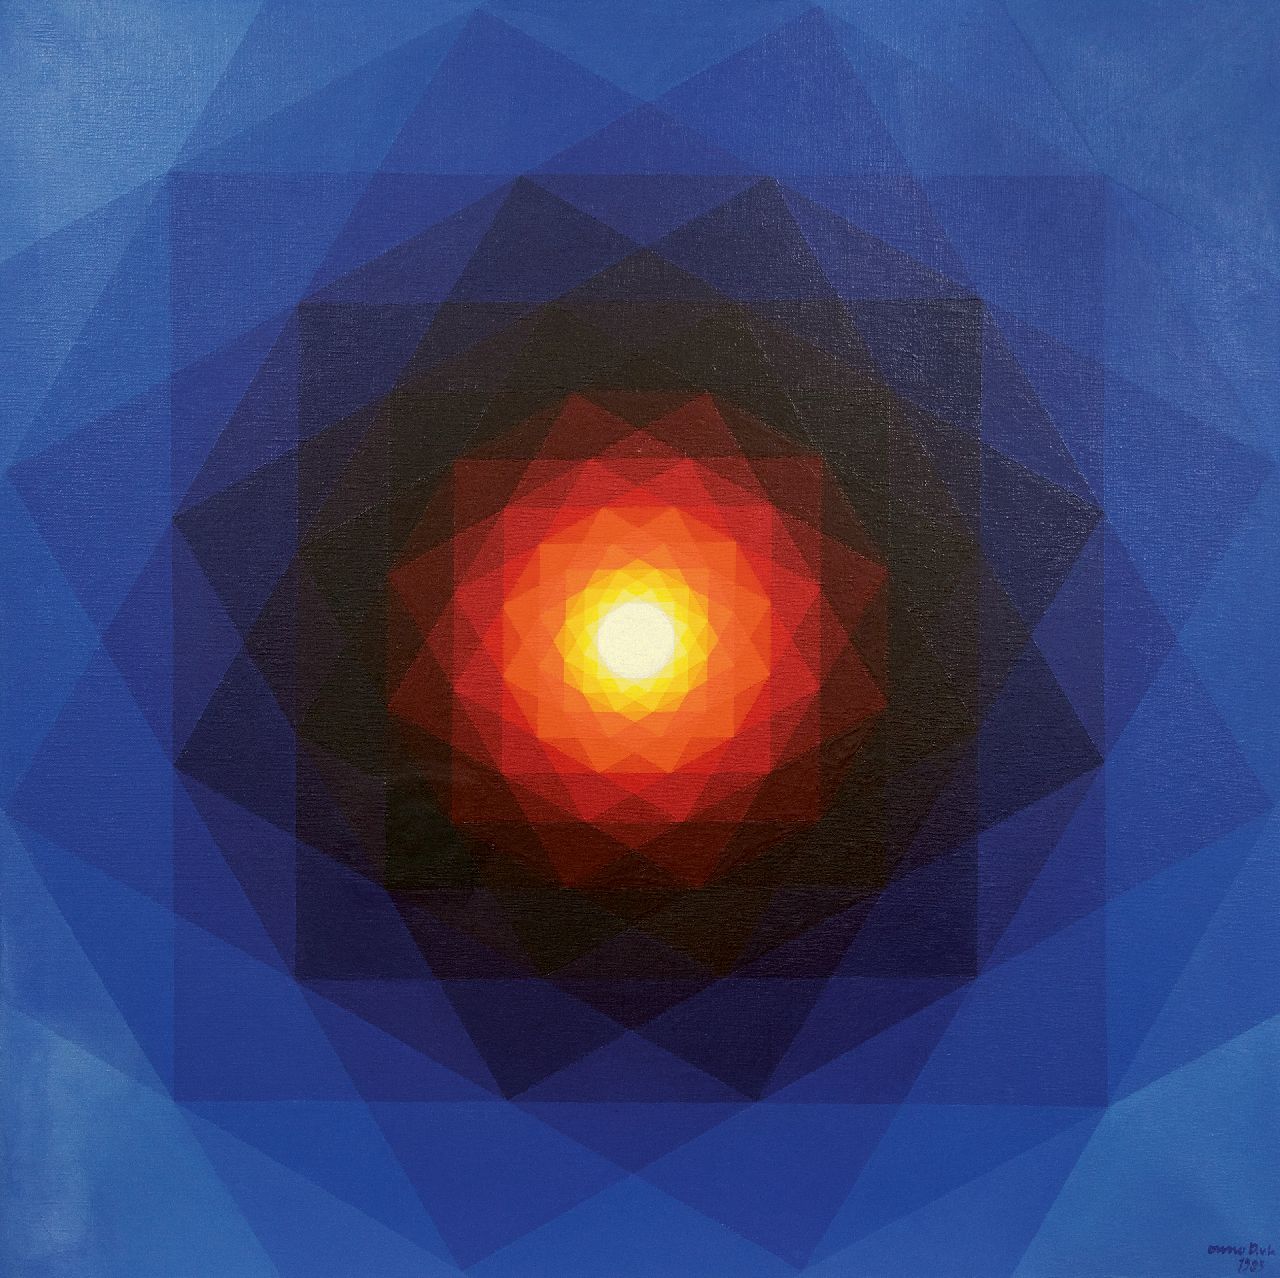 Docters van Leeuwen E.H.O.  | Eric Helge 'Onno' Docters van Leeuwen | Paintings offered for sale | Mandala 'Herfst', acrylic on canvas 100.0 x 100.0 cm, signed l.r. and dated 1983